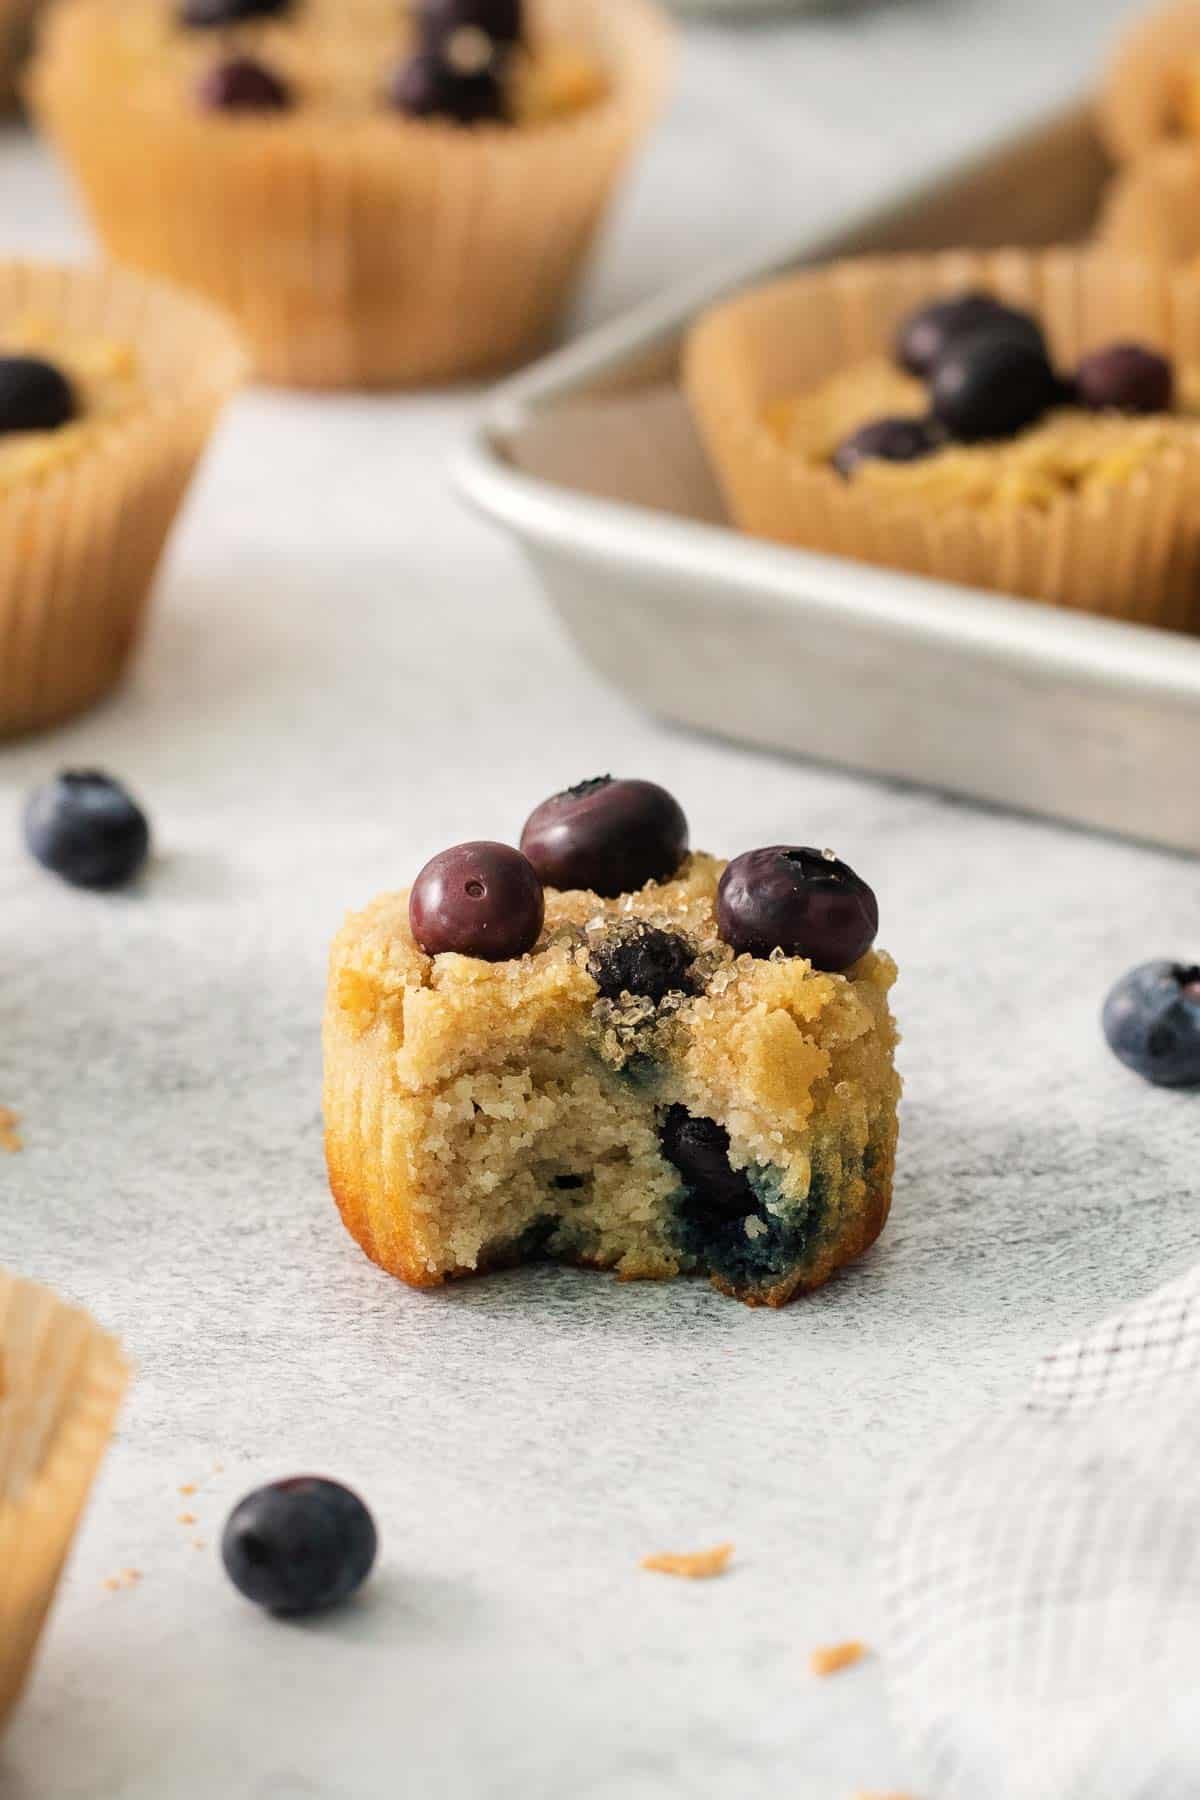 A close-up photo of a blueberry muffin with a bite taken out of it